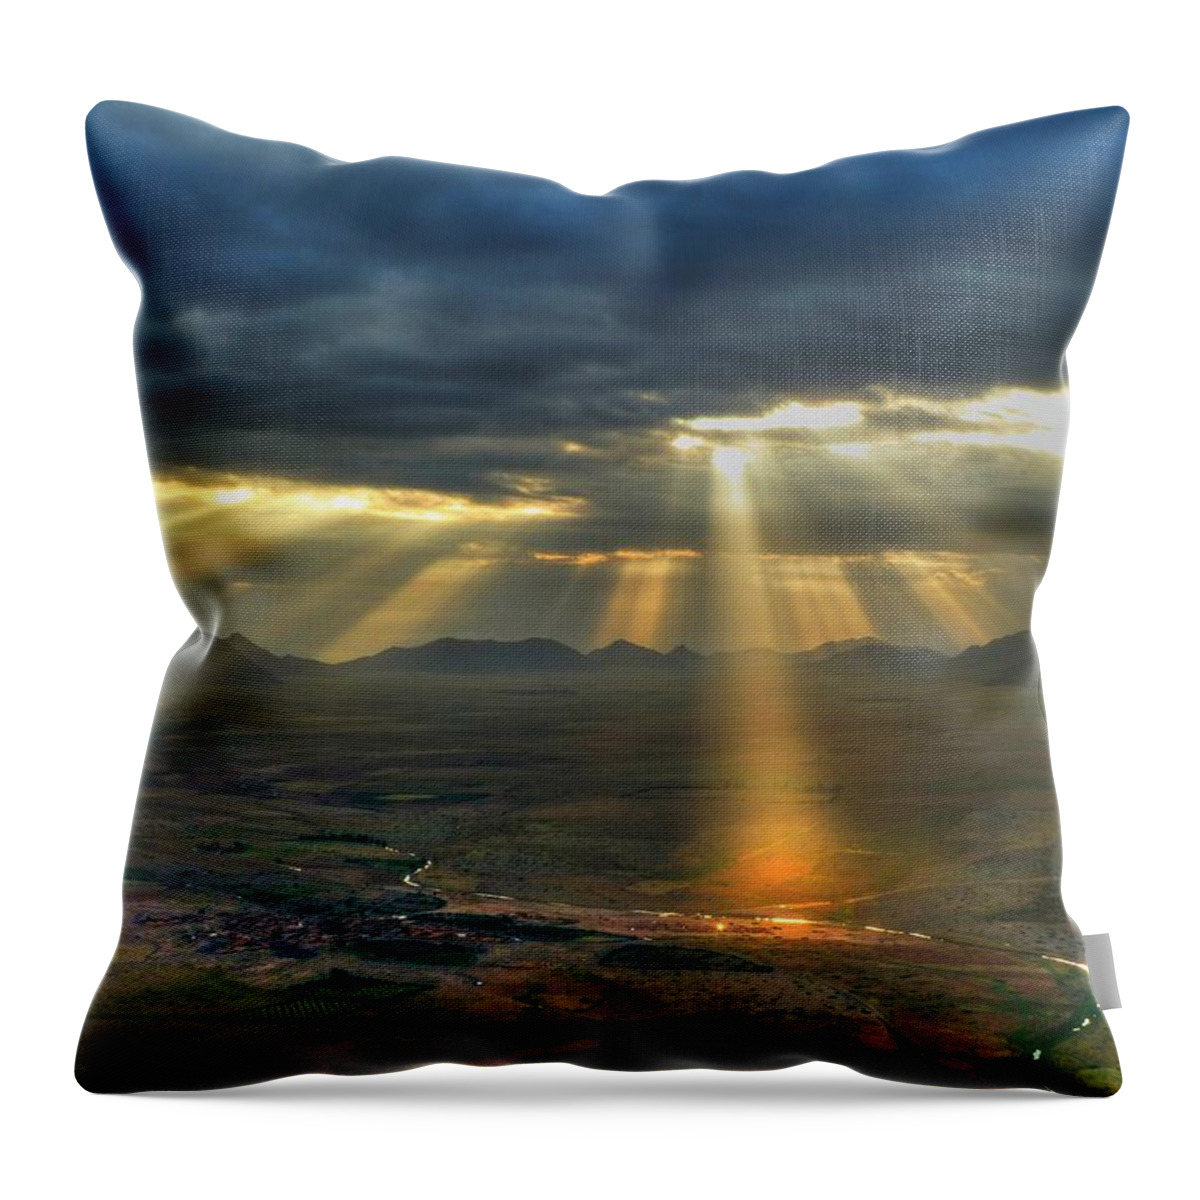 Tranquility Throw Pillow featuring the photograph First Light In The Atlas Mountains by Stephen Wallace Photography